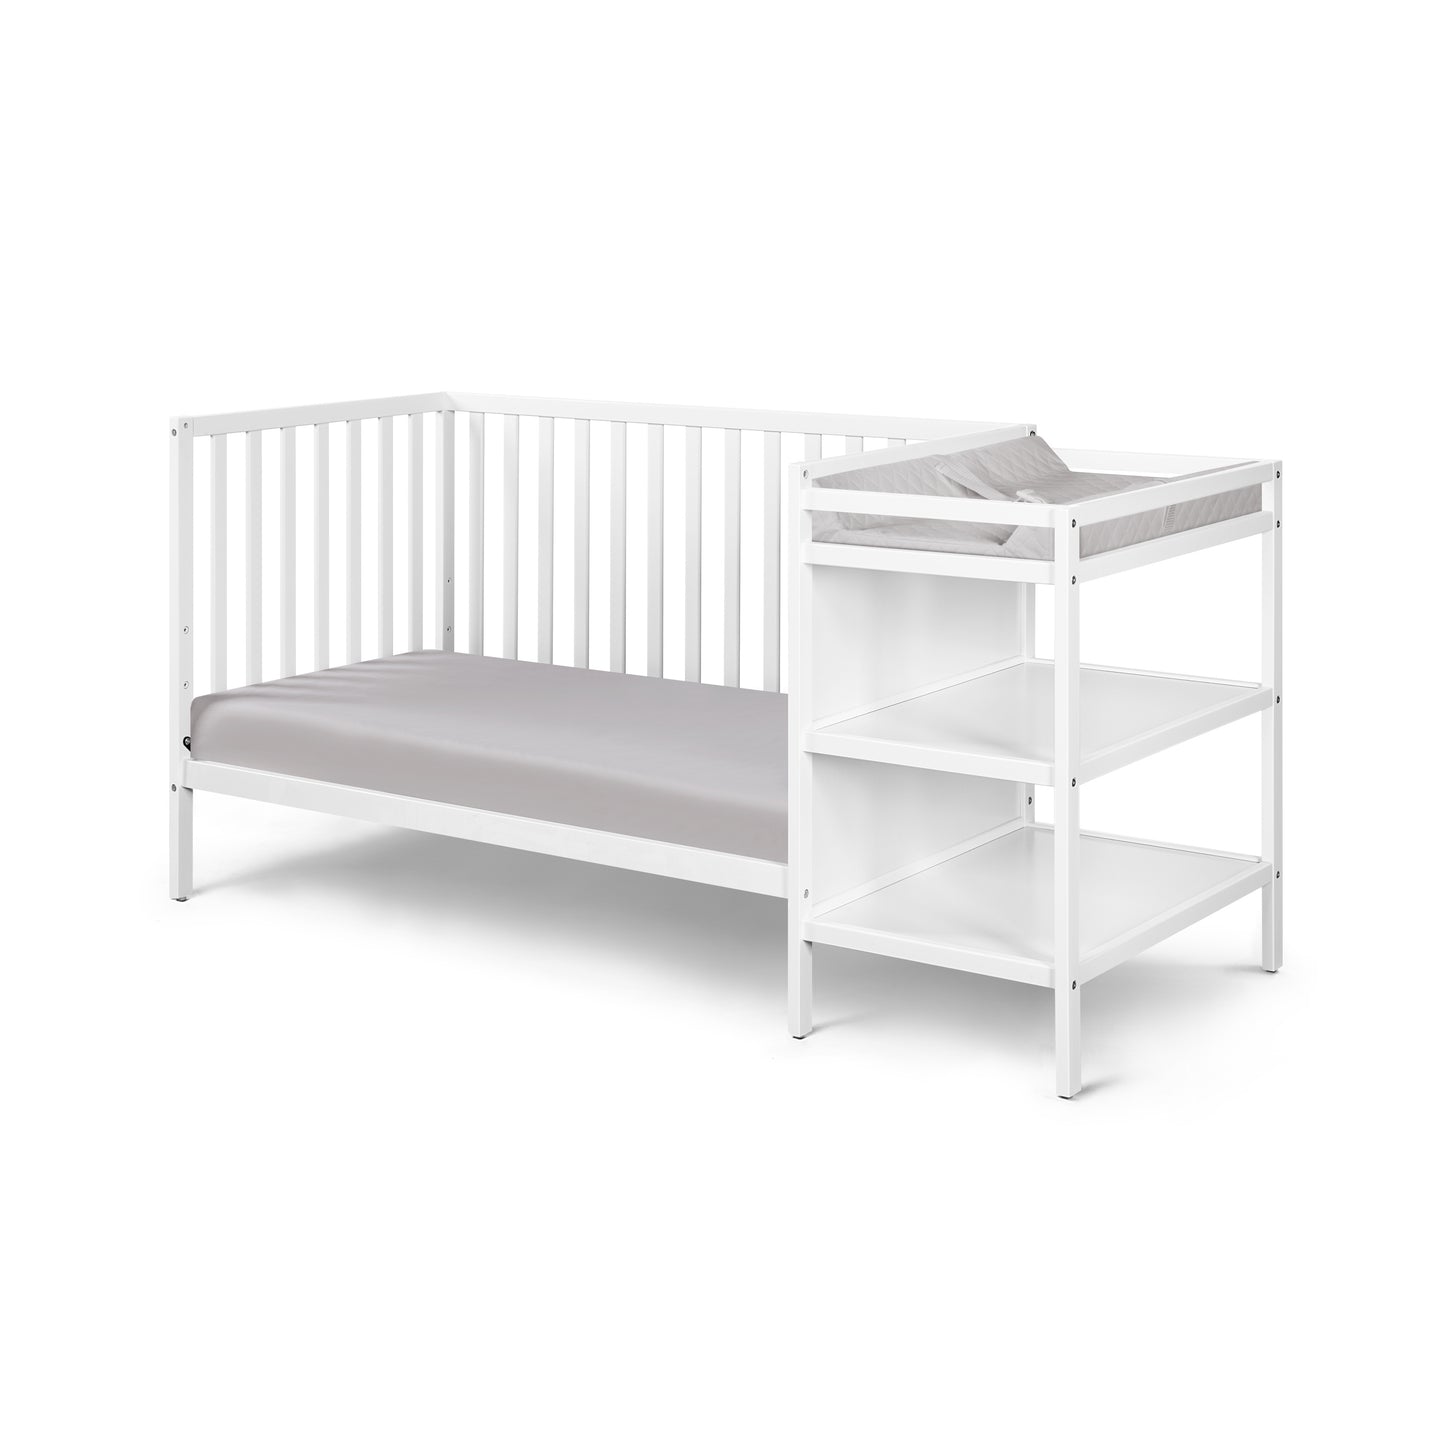 Palmer 3-in-1 Convertible Crib and Changer Combo White